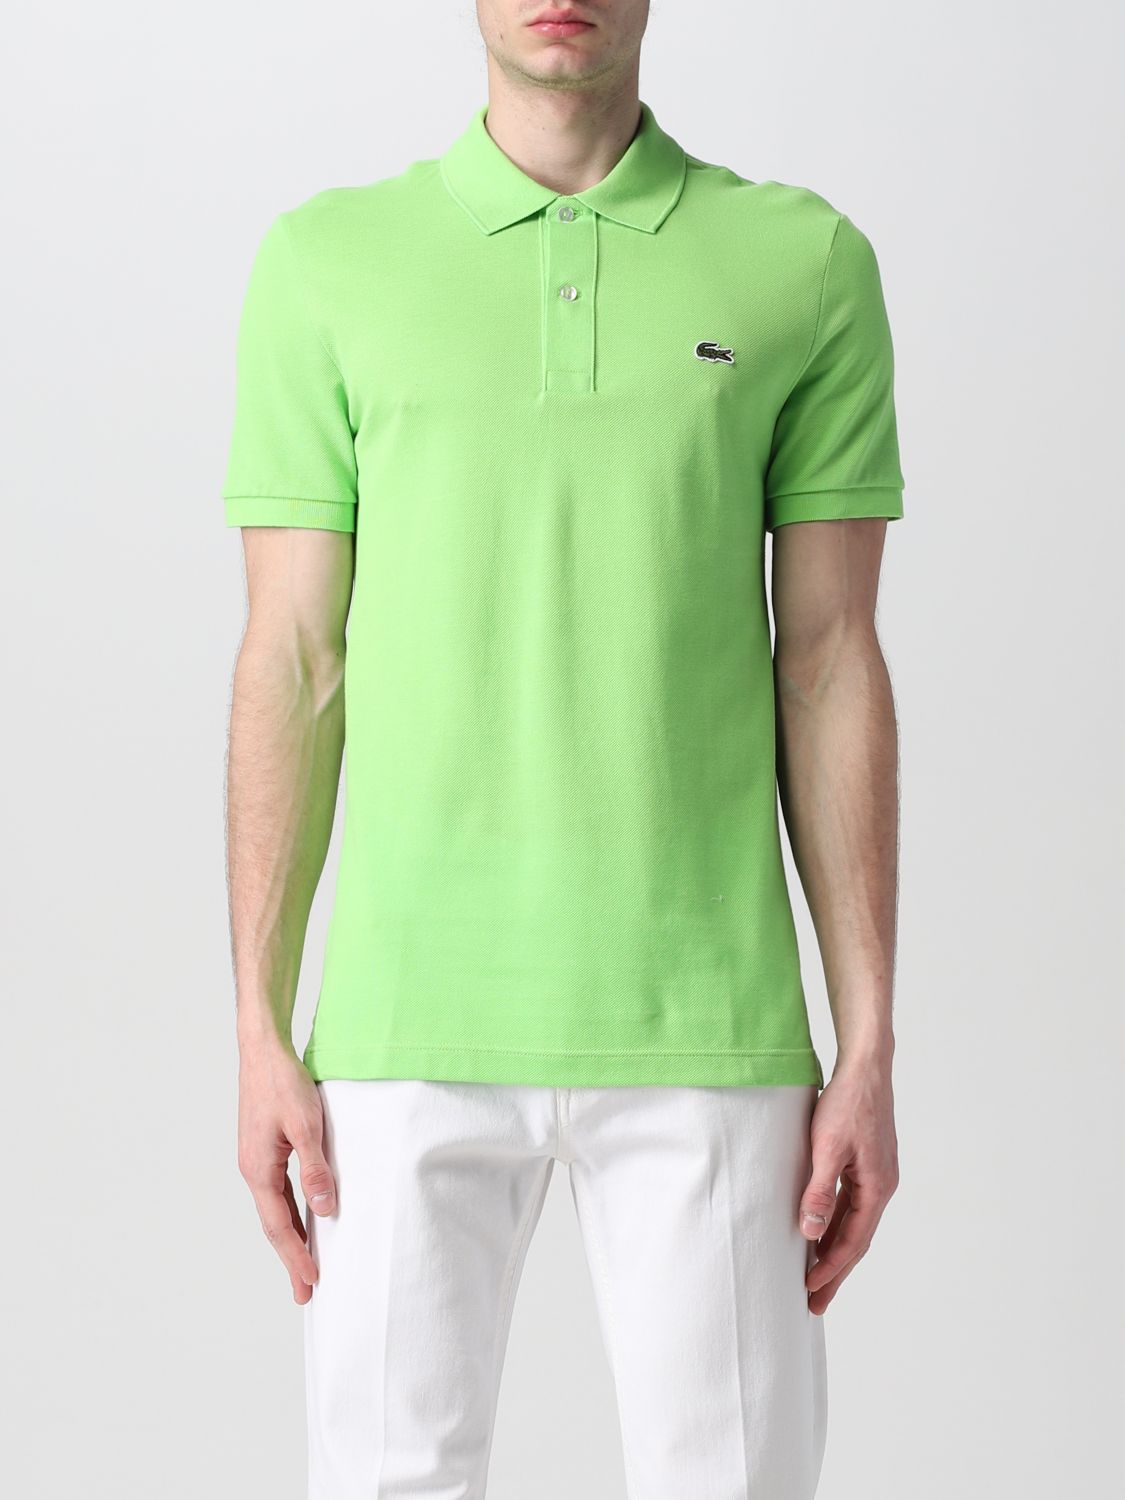 Lacoste Polo Mint Green | lupon.gov.ph